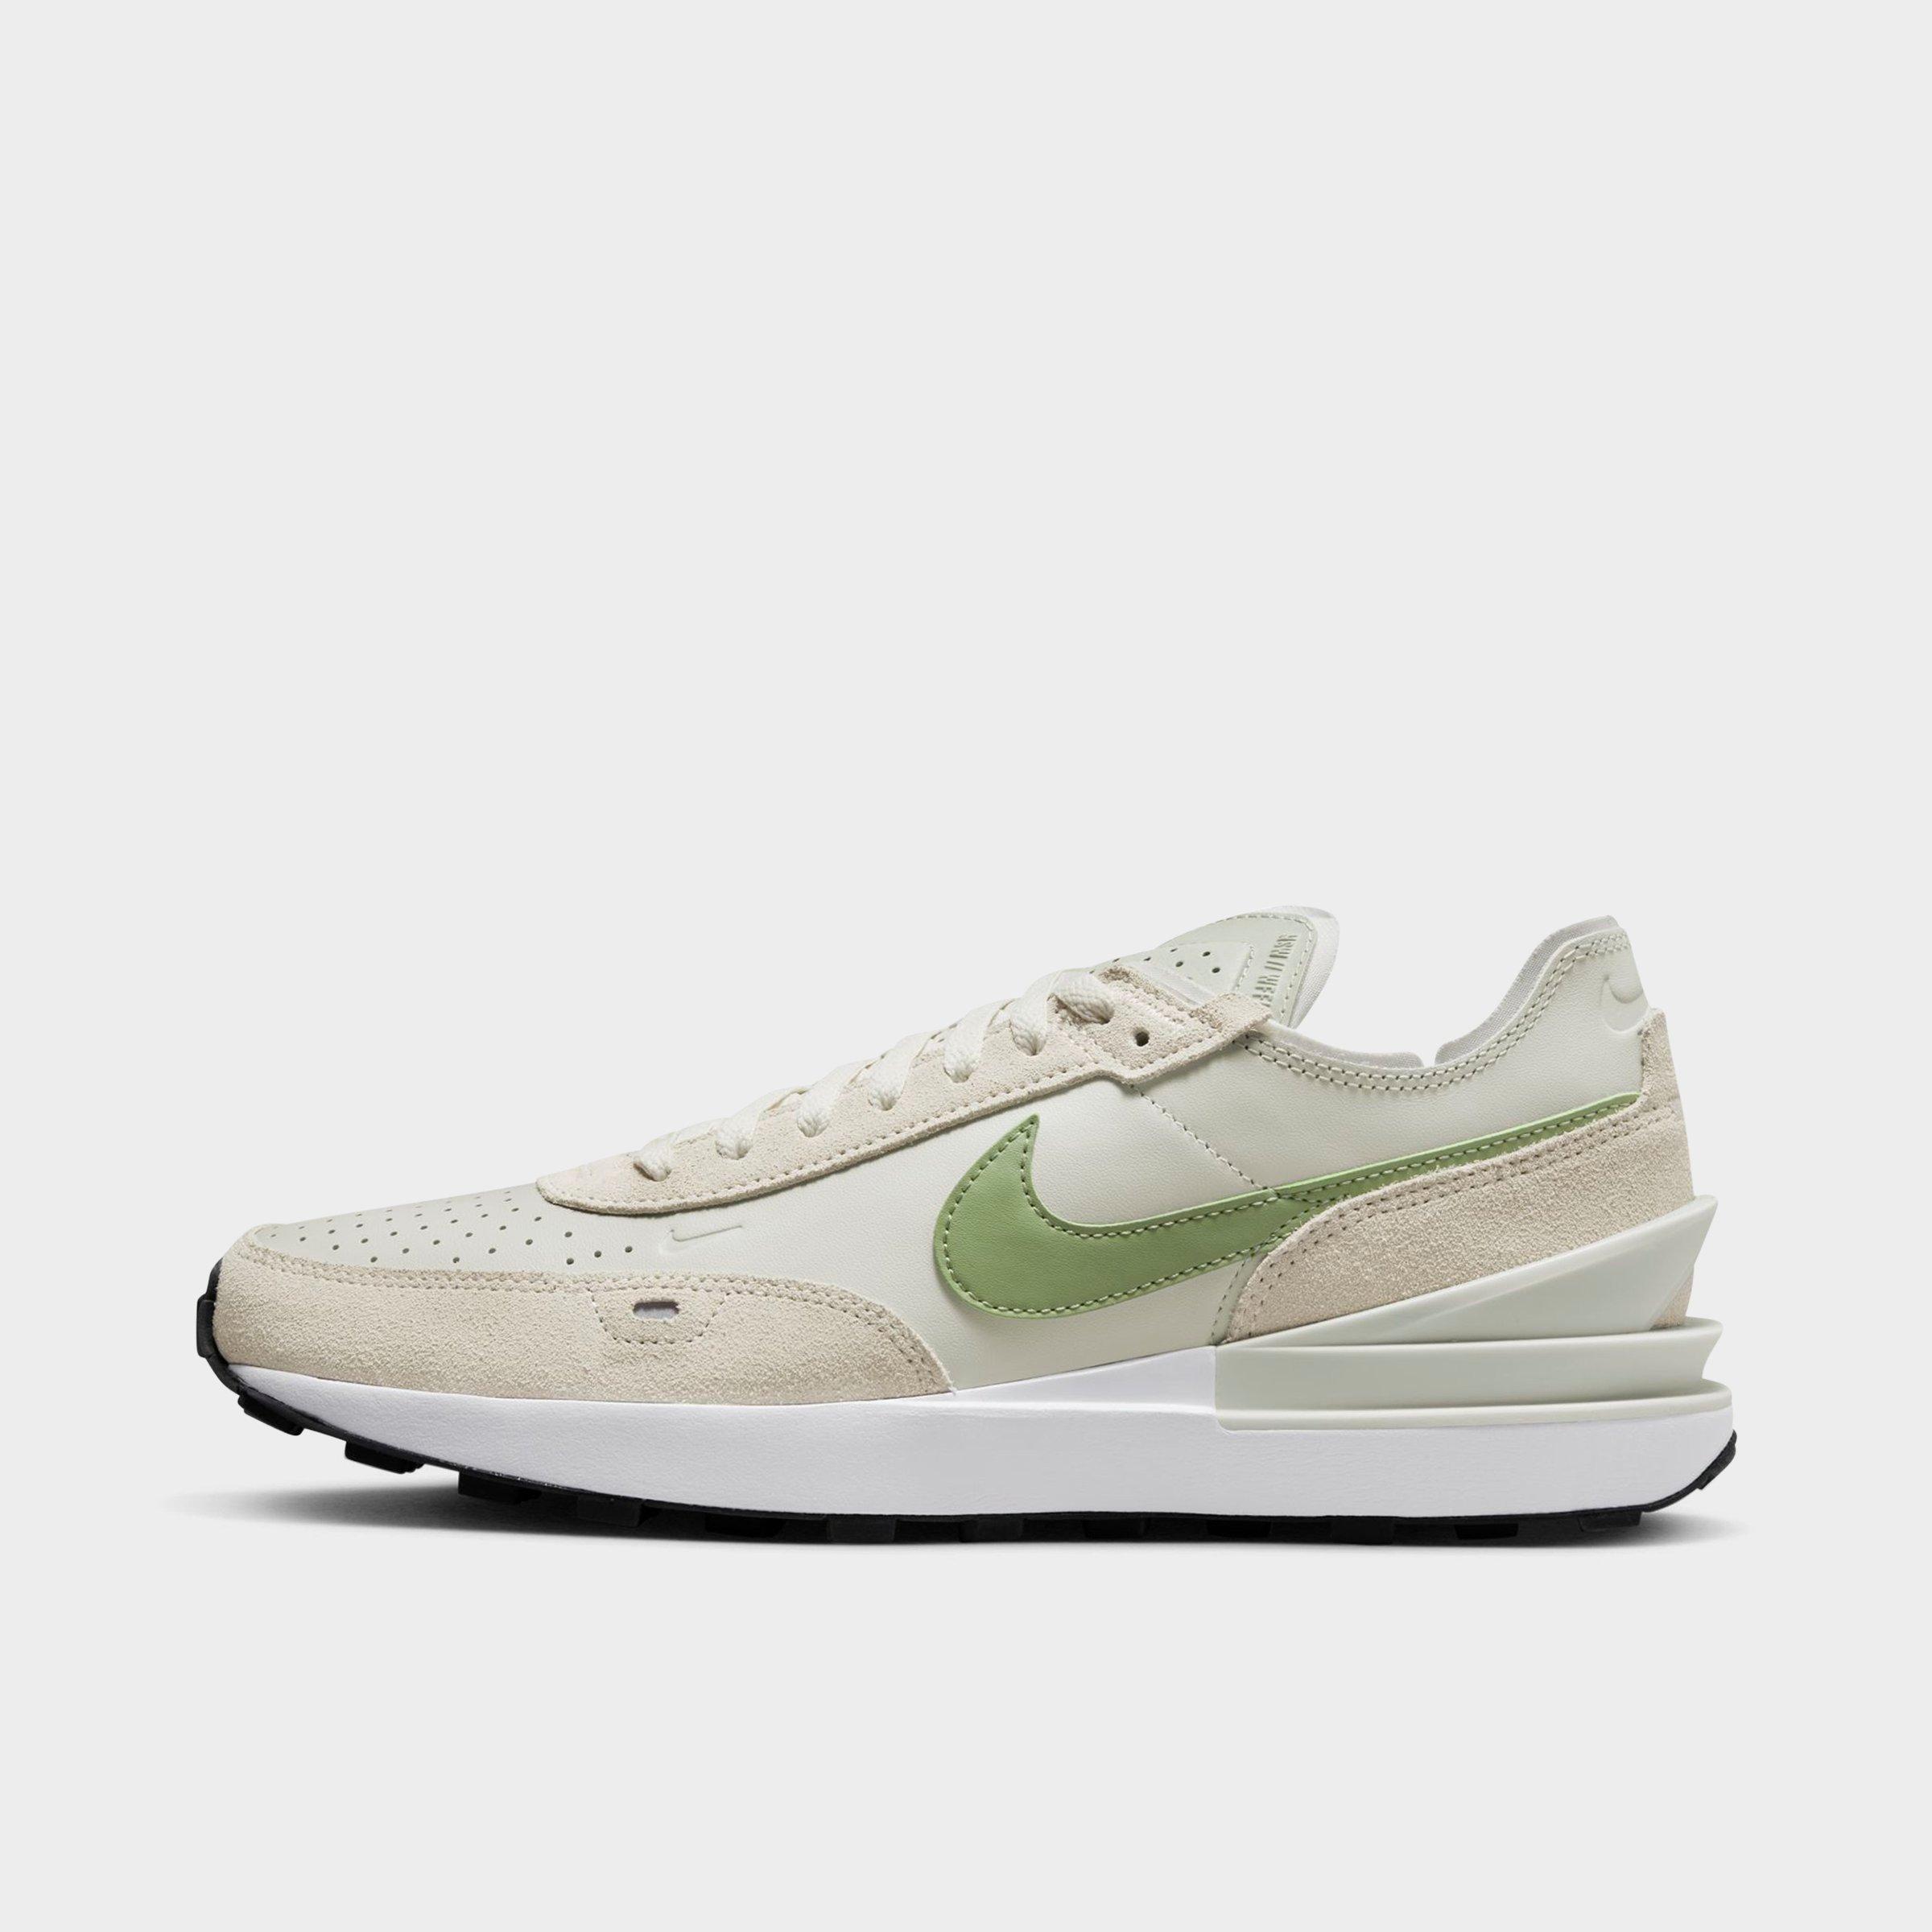 NIKE NIKE MEN'S WAFFLE ONE LEATHER CASUAL SHOES